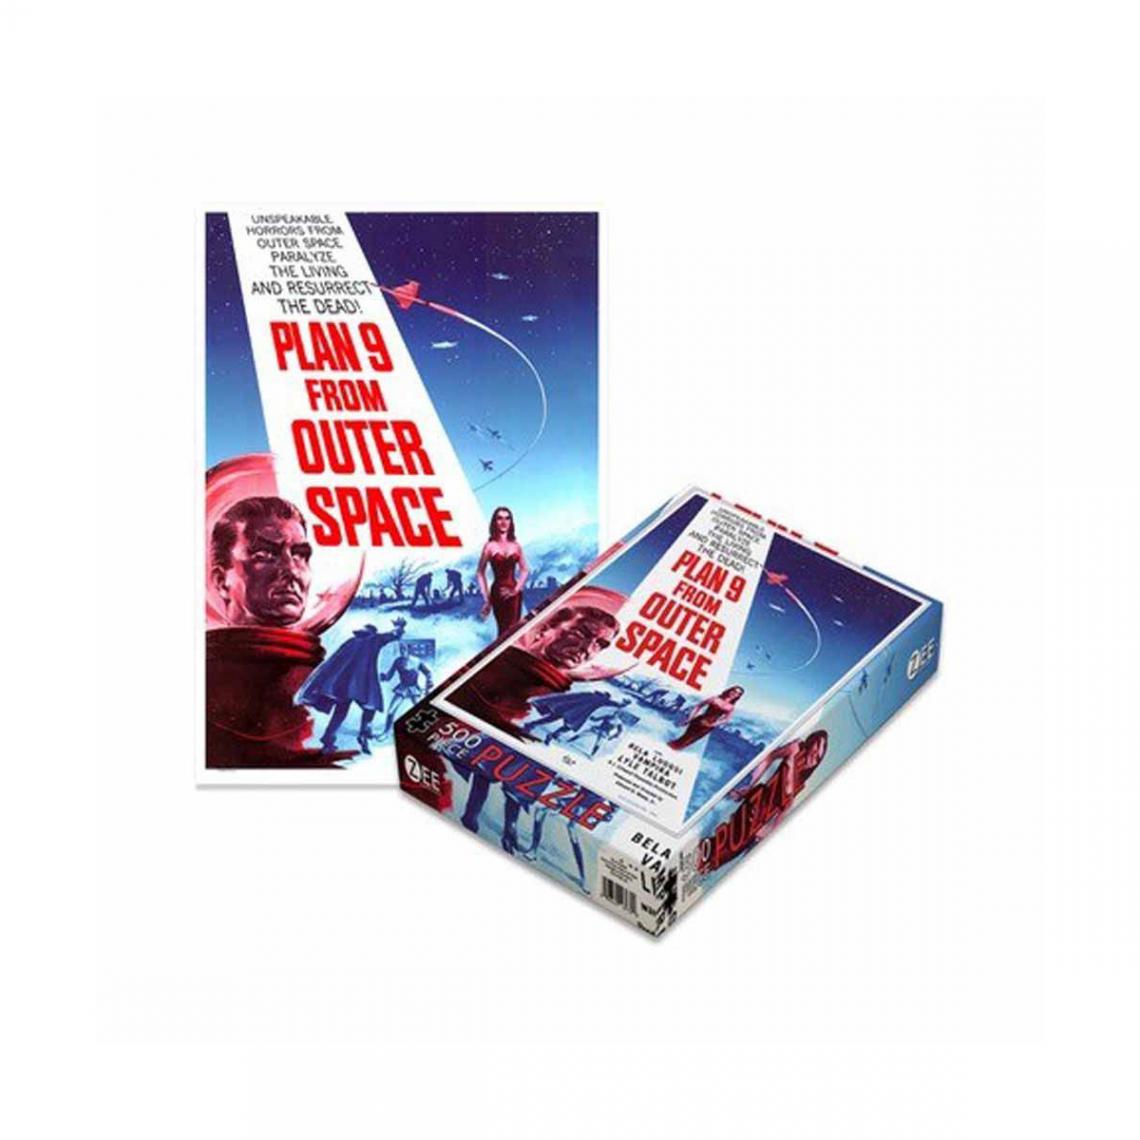 Phd Merchandise - Plan 9 from Outer Space - Puzzle From Outer Space - Puzzles 3D